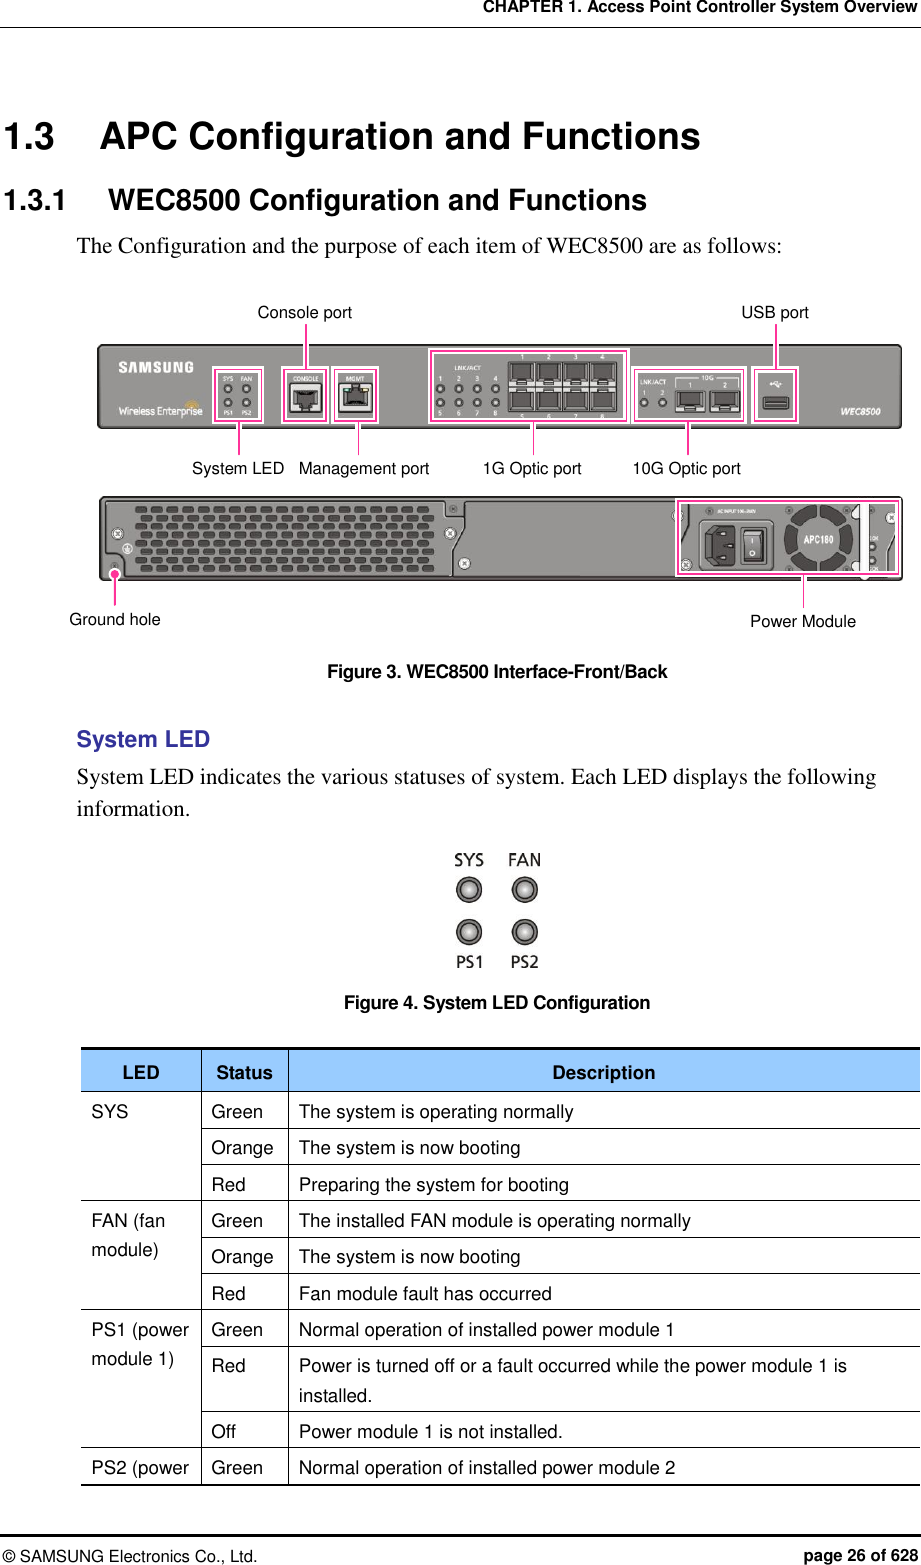 CHAPTER 1. Access Point Controller System Overview ©  SAMSUNG Electronics Co., Ltd.  page 26 of 628 1.3  APC Configuration and Functions 1.3.1  WEC8500 Configuration and Functions The Configuration and the purpose of each item of WEC8500 are as follows:  Figure 3. WEC8500 Interface-Front/Back  System LED System LED indicates the various statuses of system. Each LED displays the following information.    Figure 4. System LED Configuration  LED Status Description SYS Green The system is operating normally Orange The system is now booting Red Preparing the system for booting FAN (fan module) Green The installed FAN module is operating normally Orange The system is now booting Red Fan module fault has occurred PS1 (power module 1) Green Normal operation of installed power module 1 Red Power is turned off or a fault occurred while the power module 1 is installed. Off Power module 1 is not installed. PS2 (power Green Normal operation of installed power module 2 Power Module Ground hole System LED Console port Management port 1G Optic port 10G Optic port USB port 